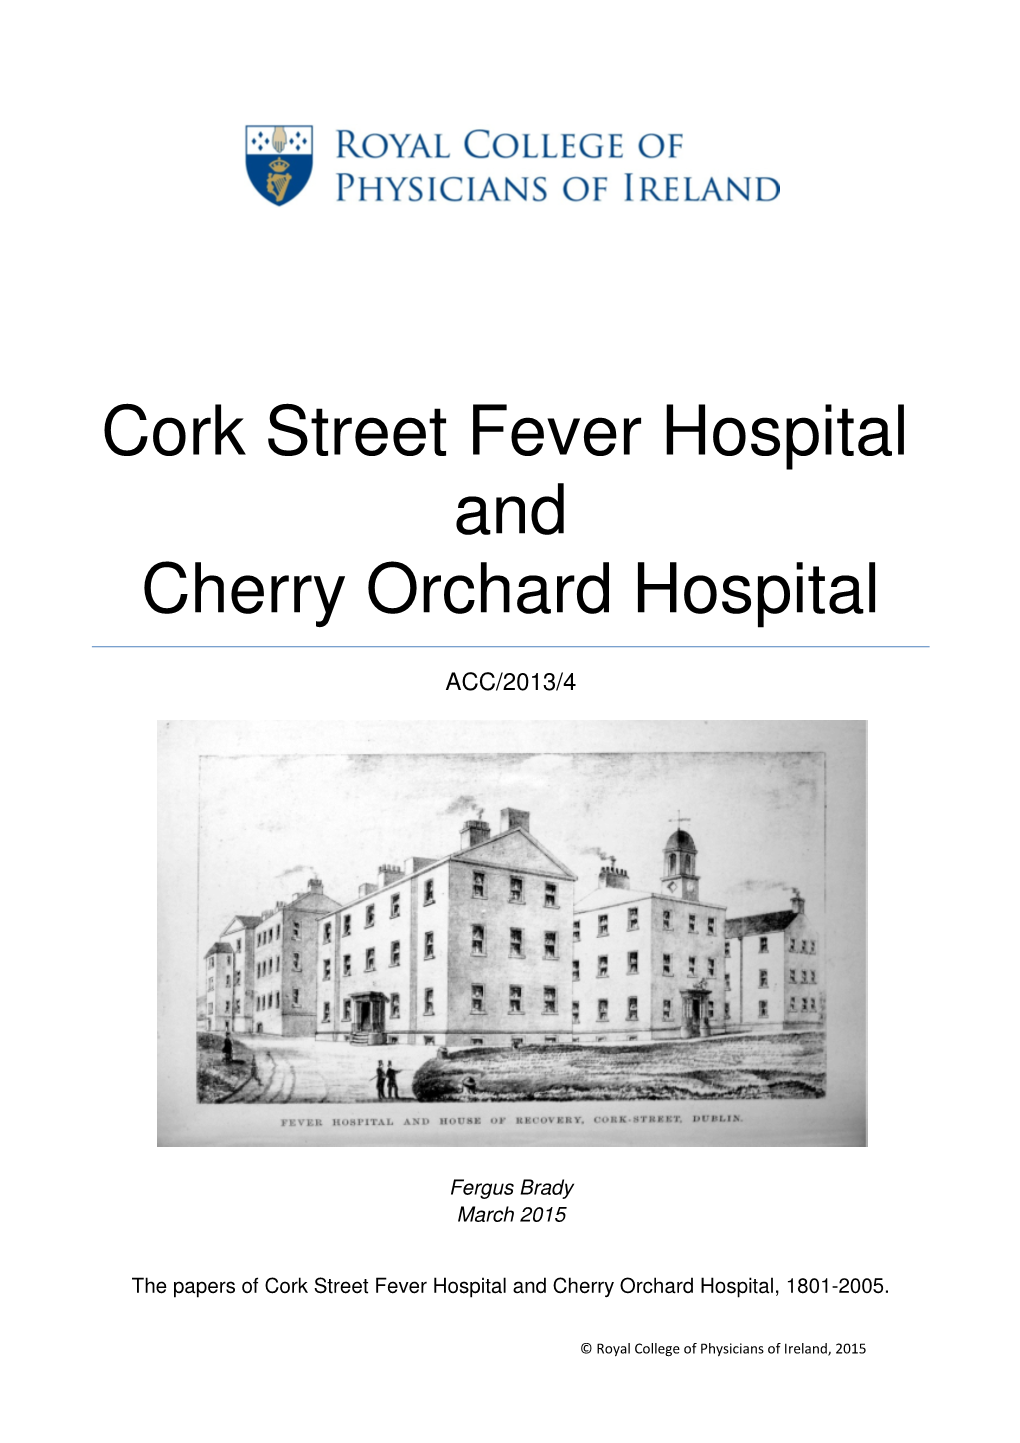 Cork Street Fever Hospital and Cherry Orchard Hospital